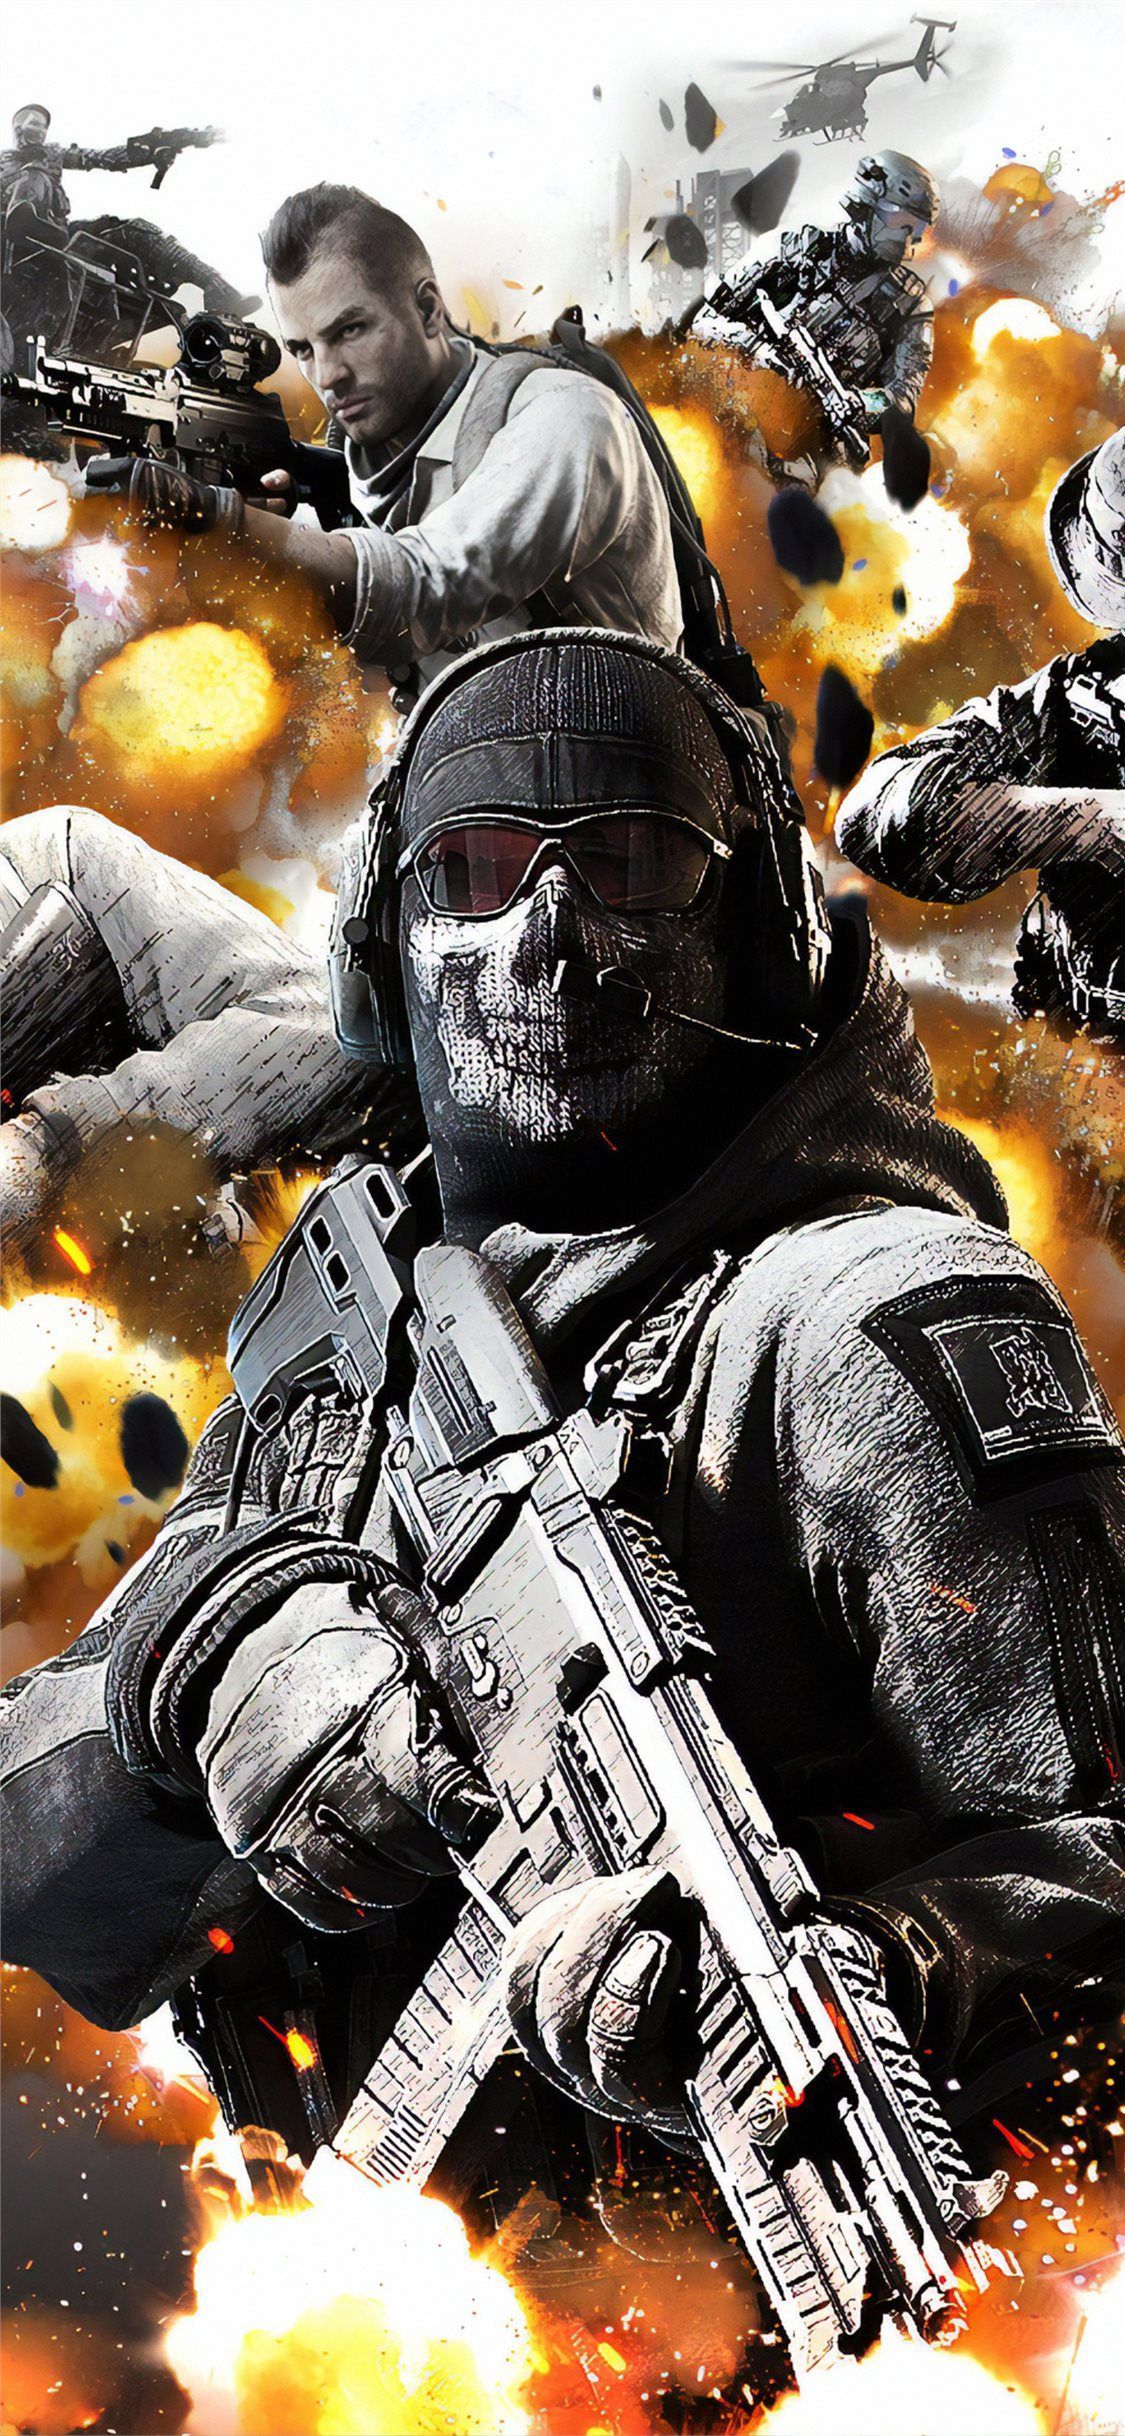 Free download the call of duty mobile 4k wallpaper , beaty your iphone. # Call Of Duty Mobile #games. Call off duty, Call of duty black, Call of duty ghosts